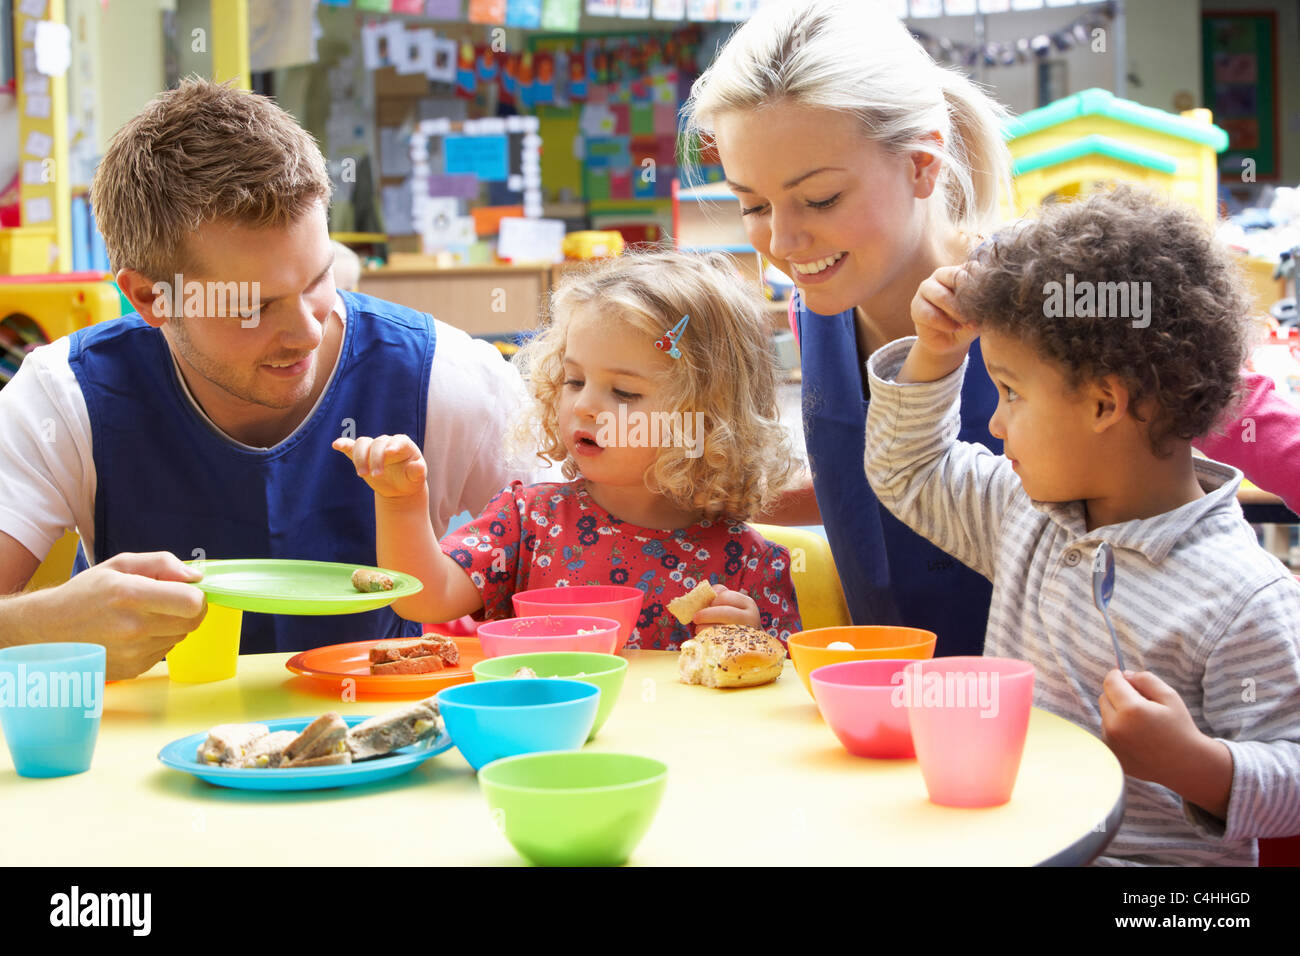 Couple and children playing with toys Stock Photo